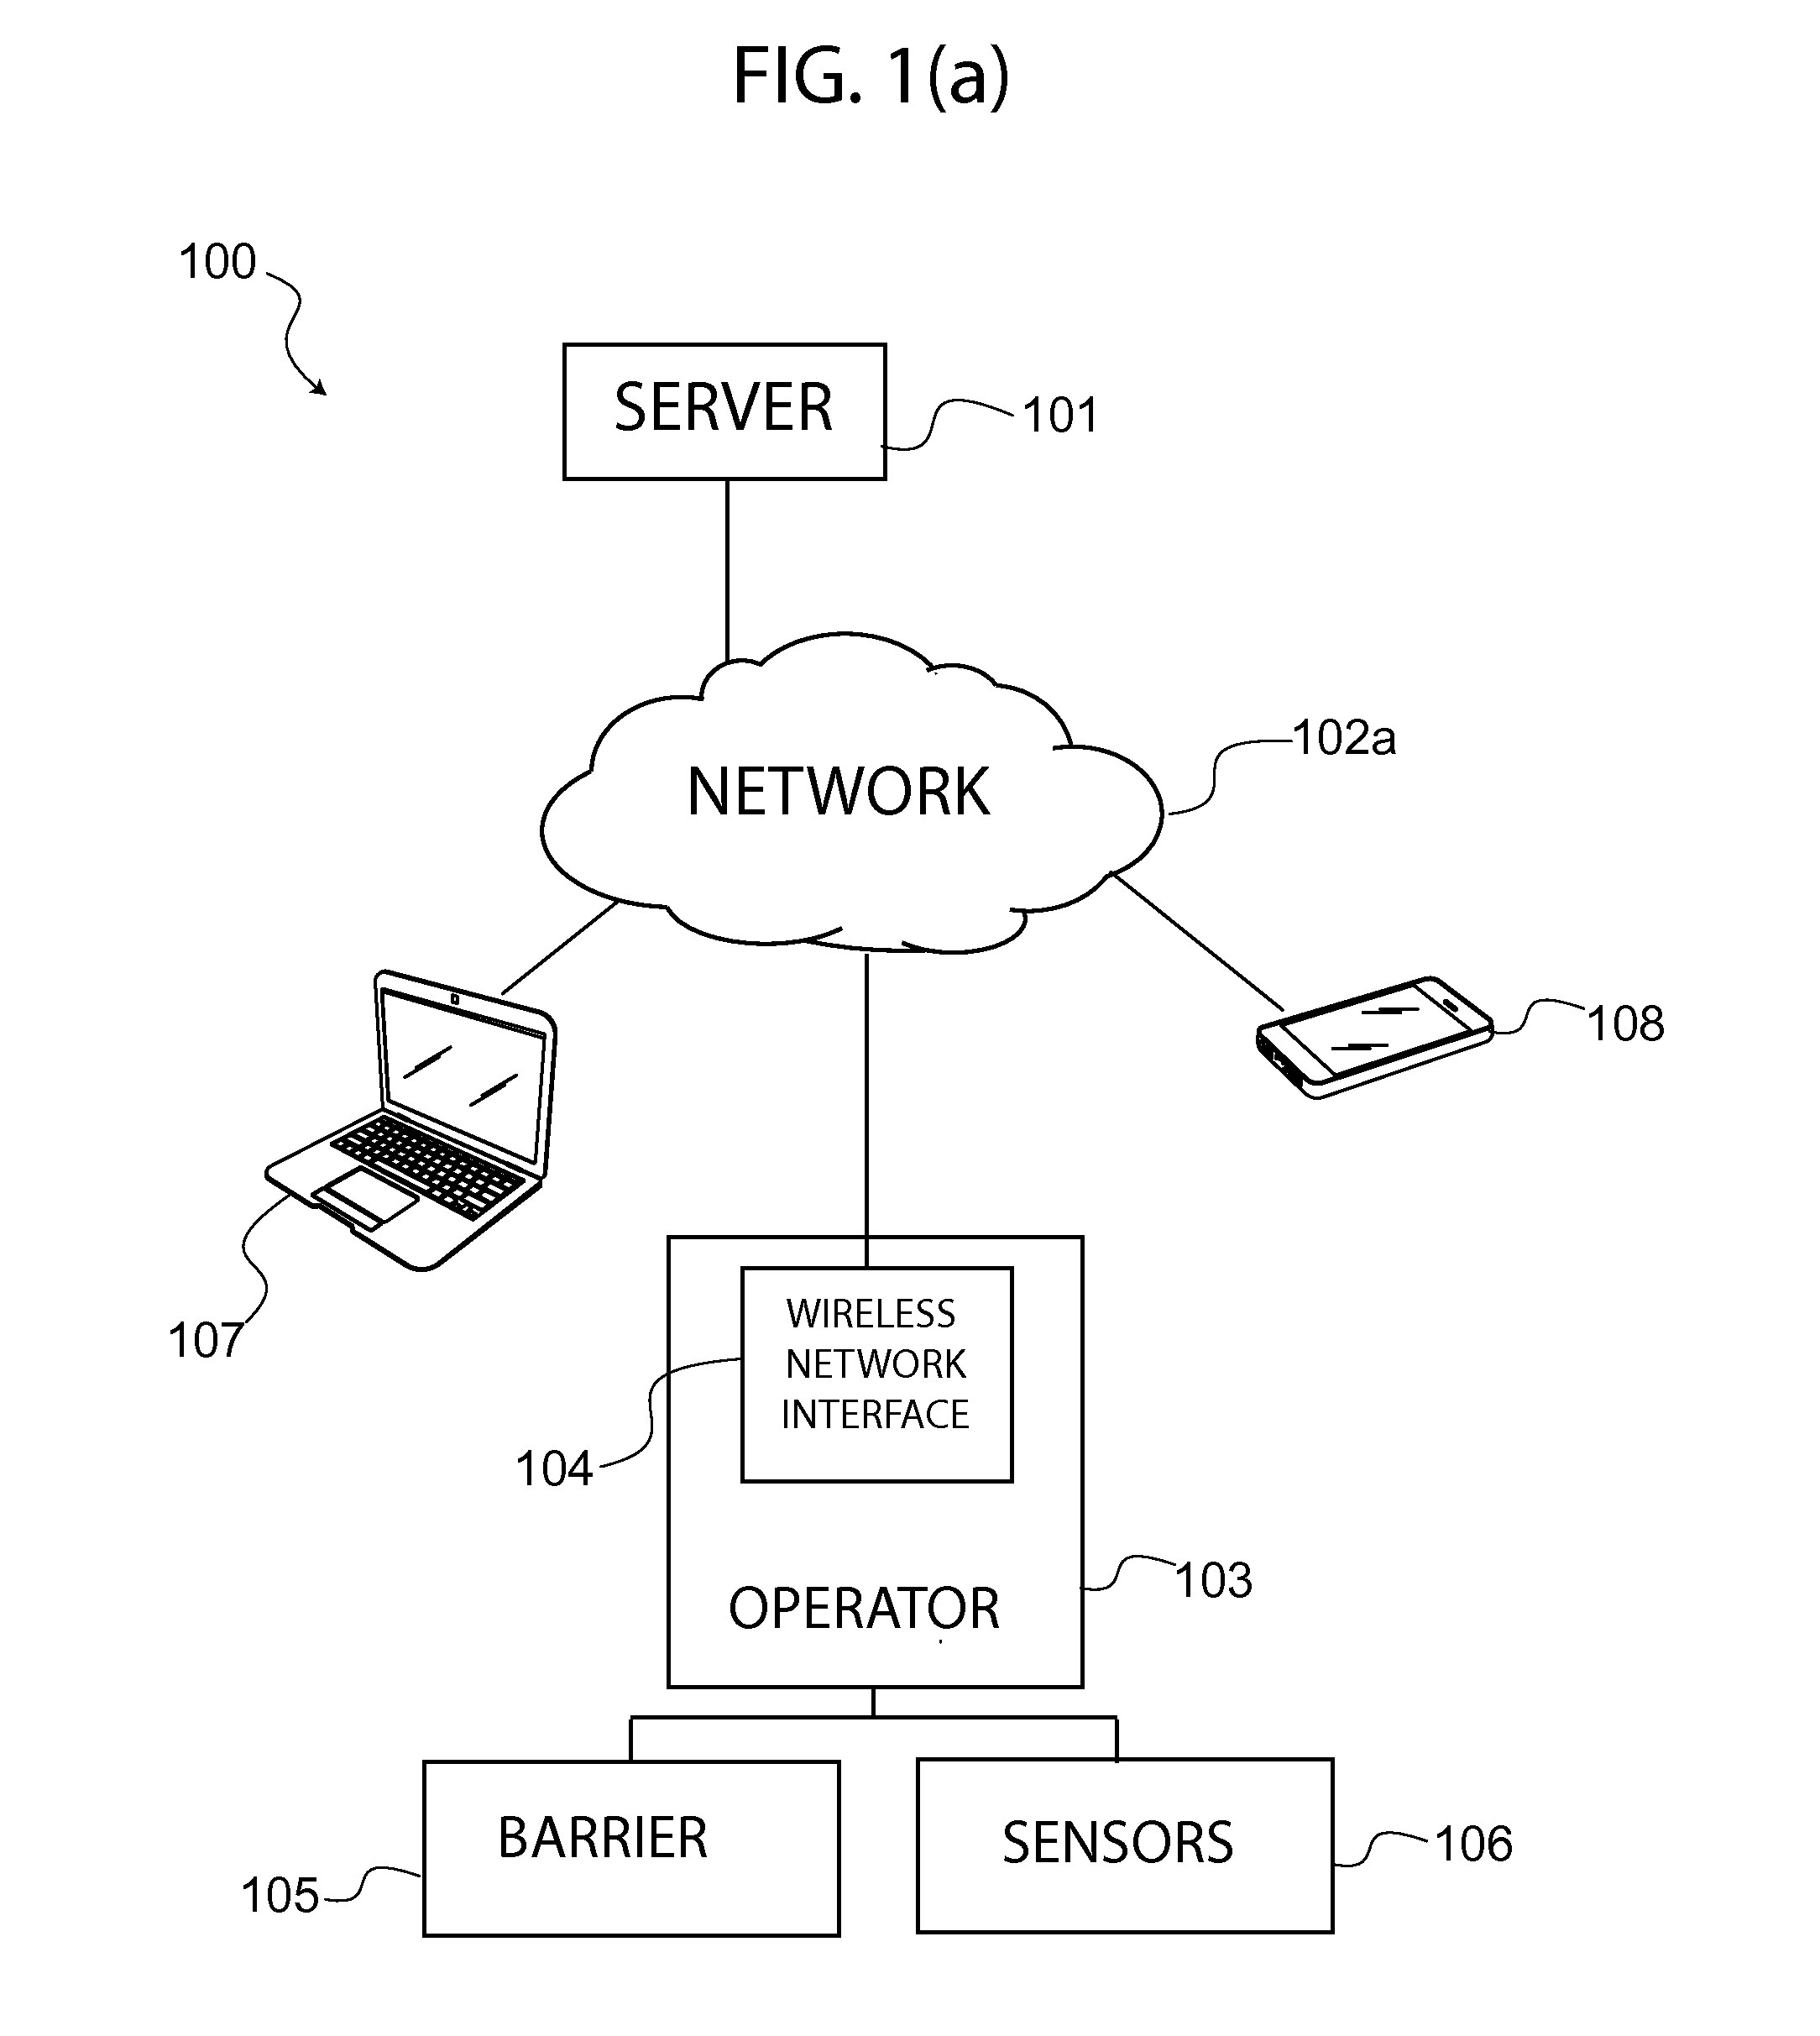 Movable barrier operator with remote monitoring capabilities